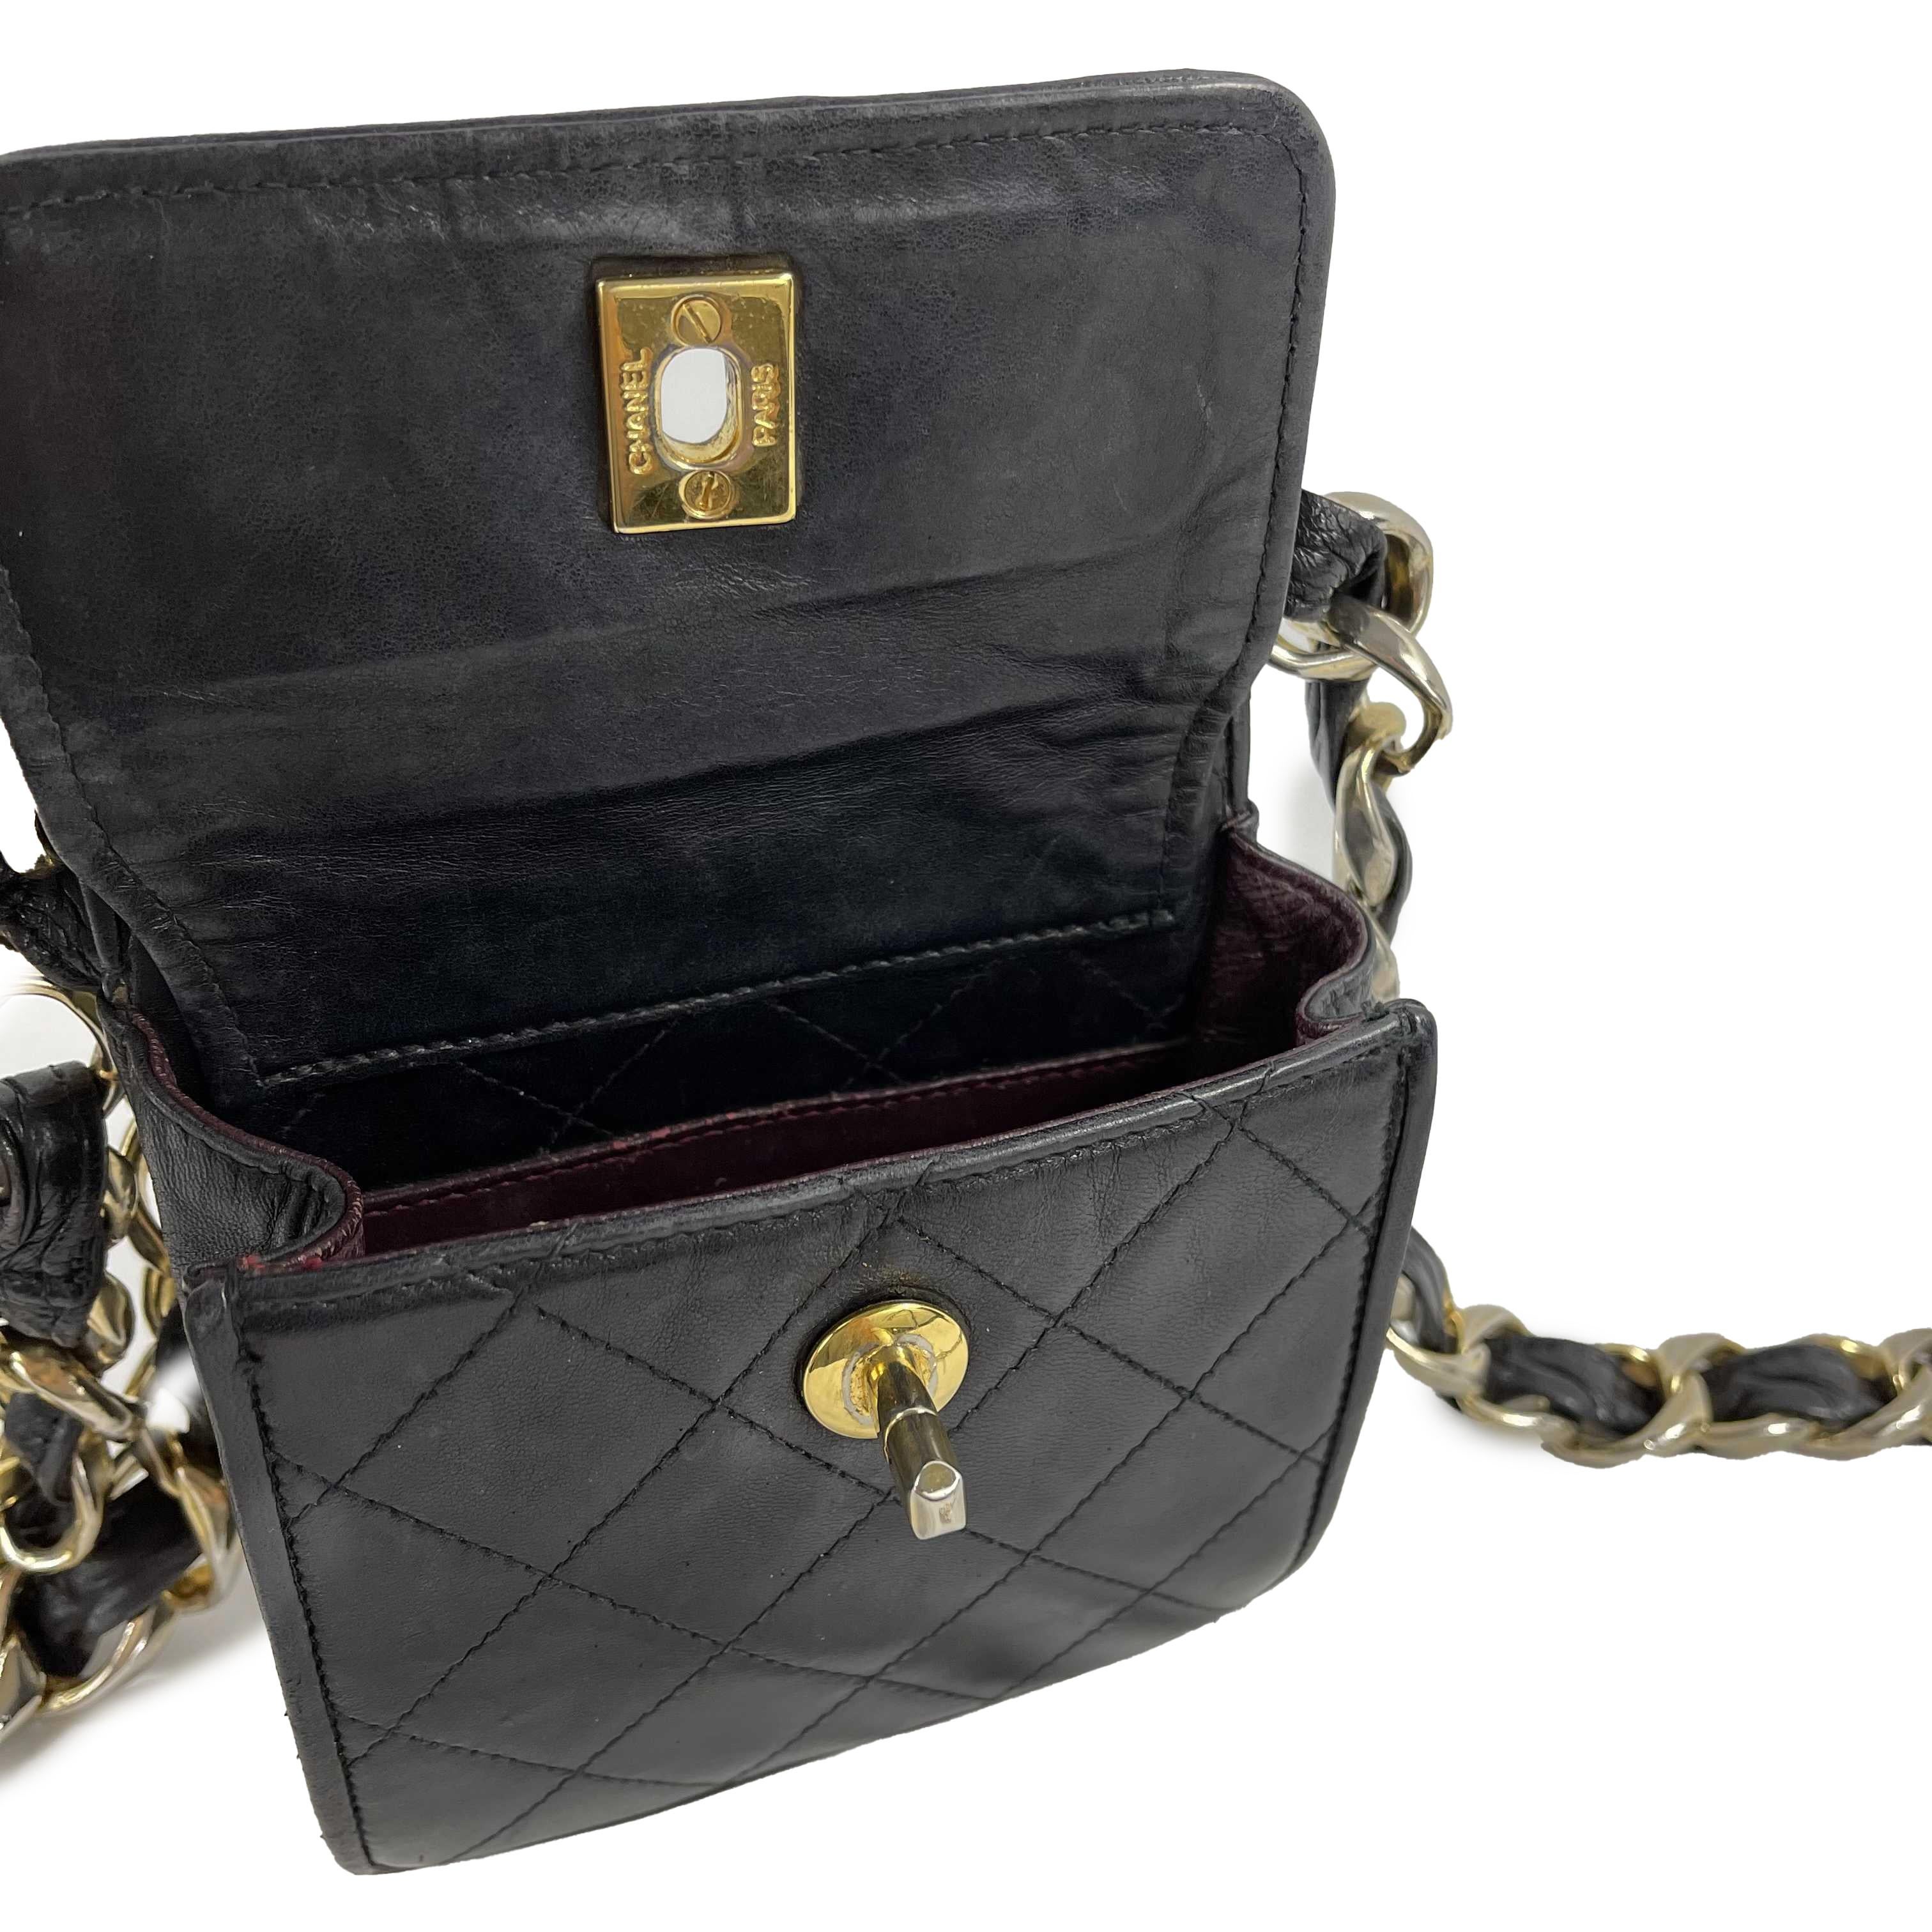 black chain fanny pack